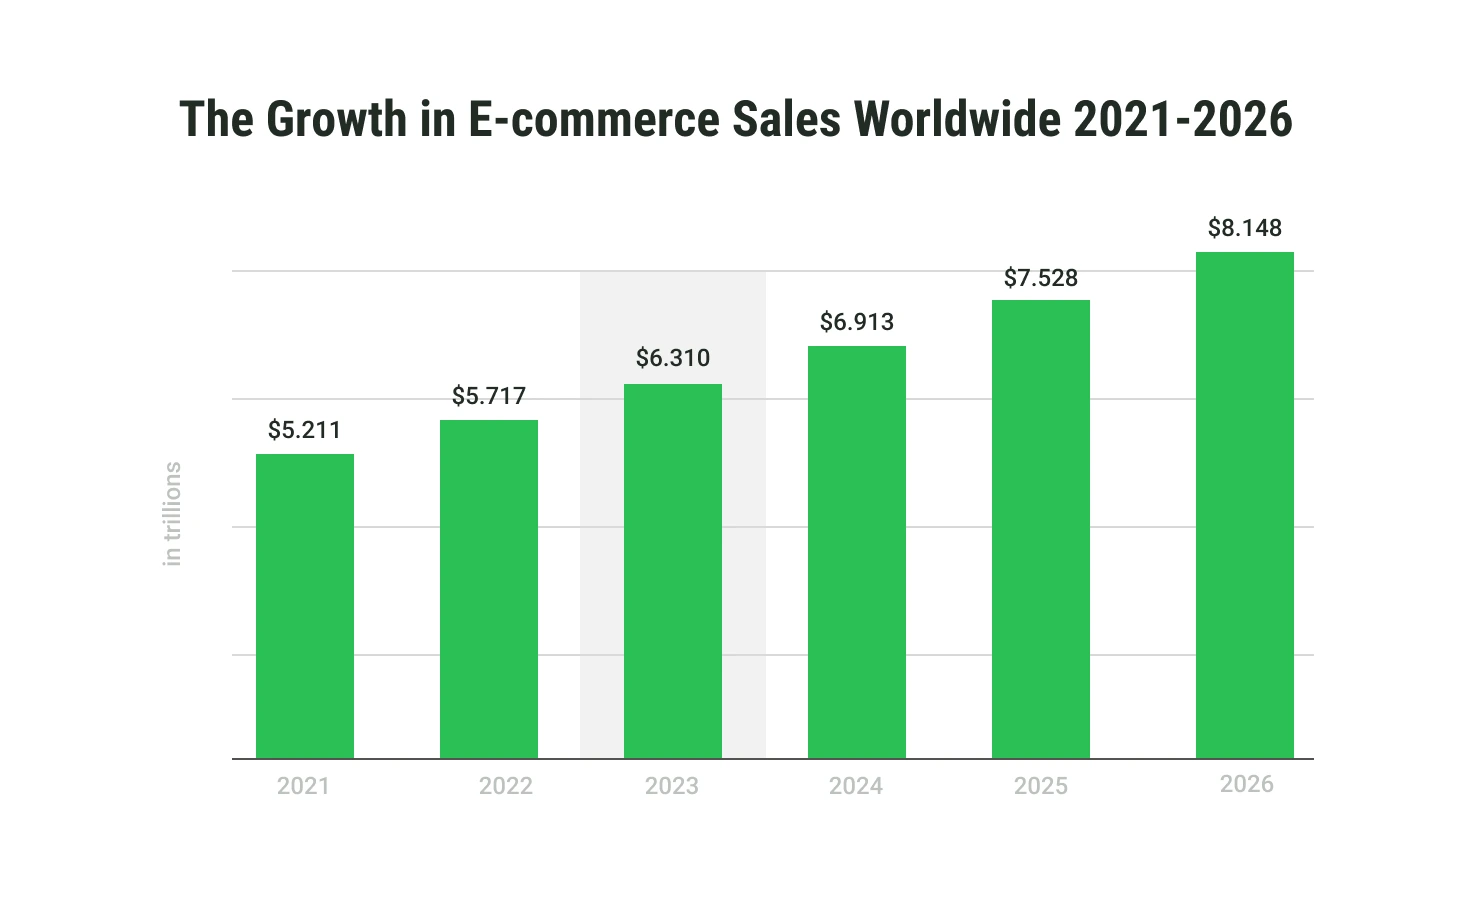 The growth of E-commerce sales worldwide